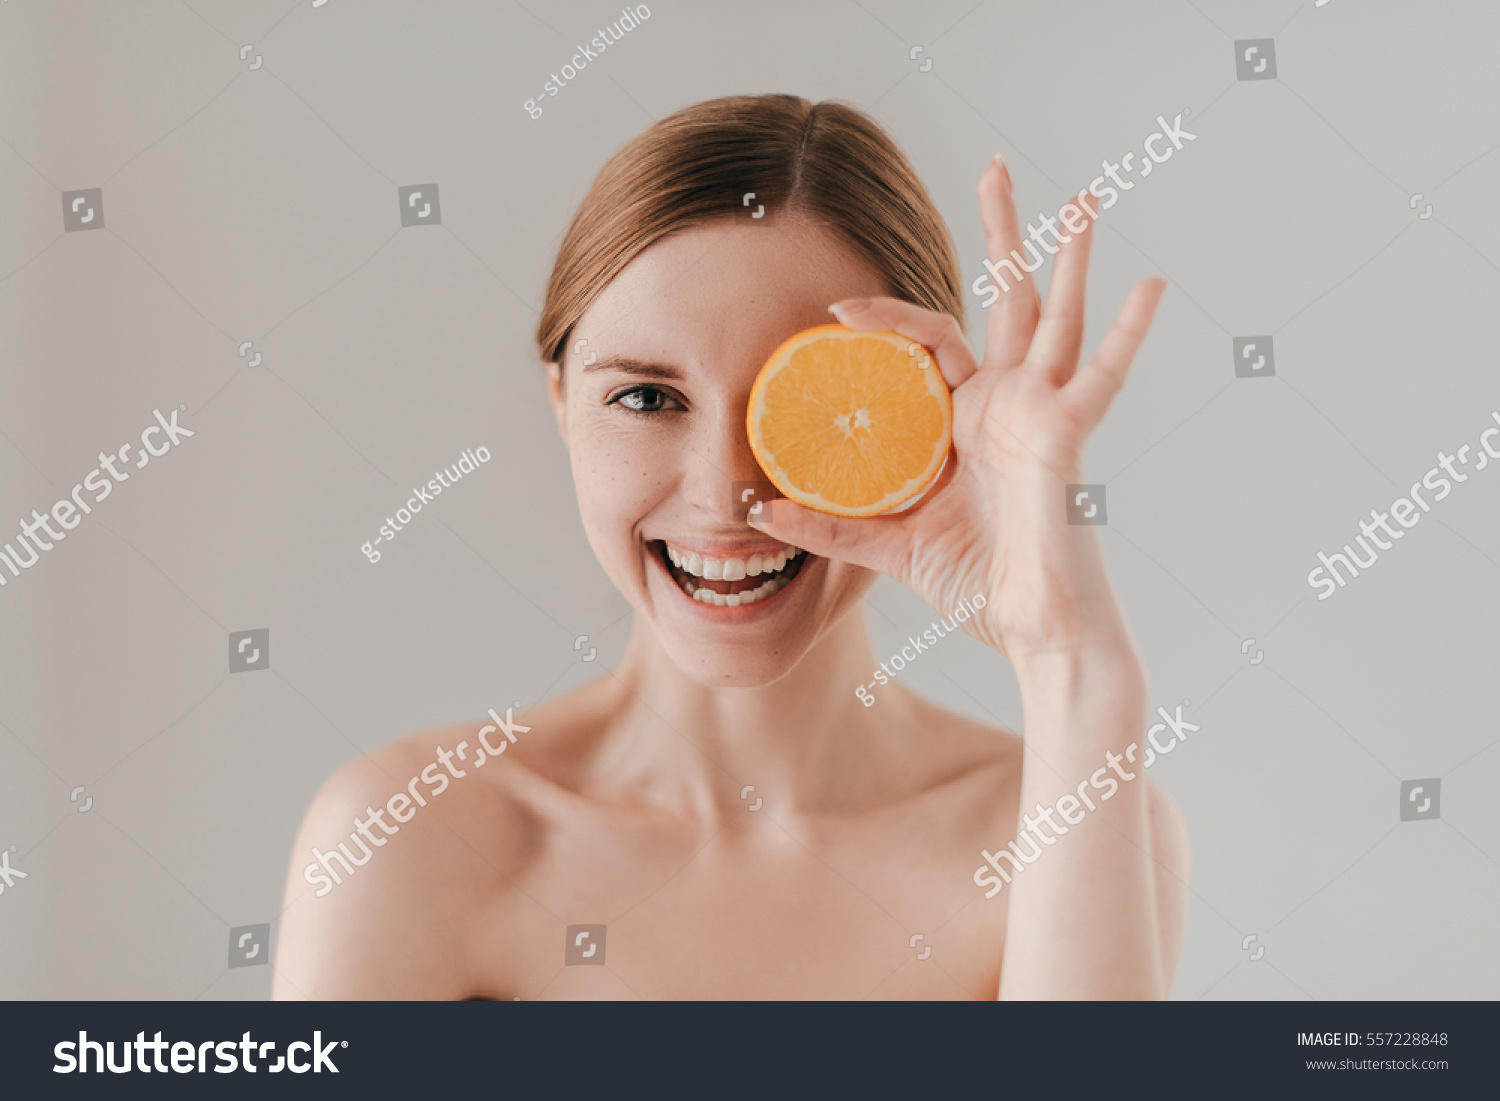 Healthy eating makes you beautiful. Attractive young woman with freckles on face holding orange slice and smiling while standing against background #557228848